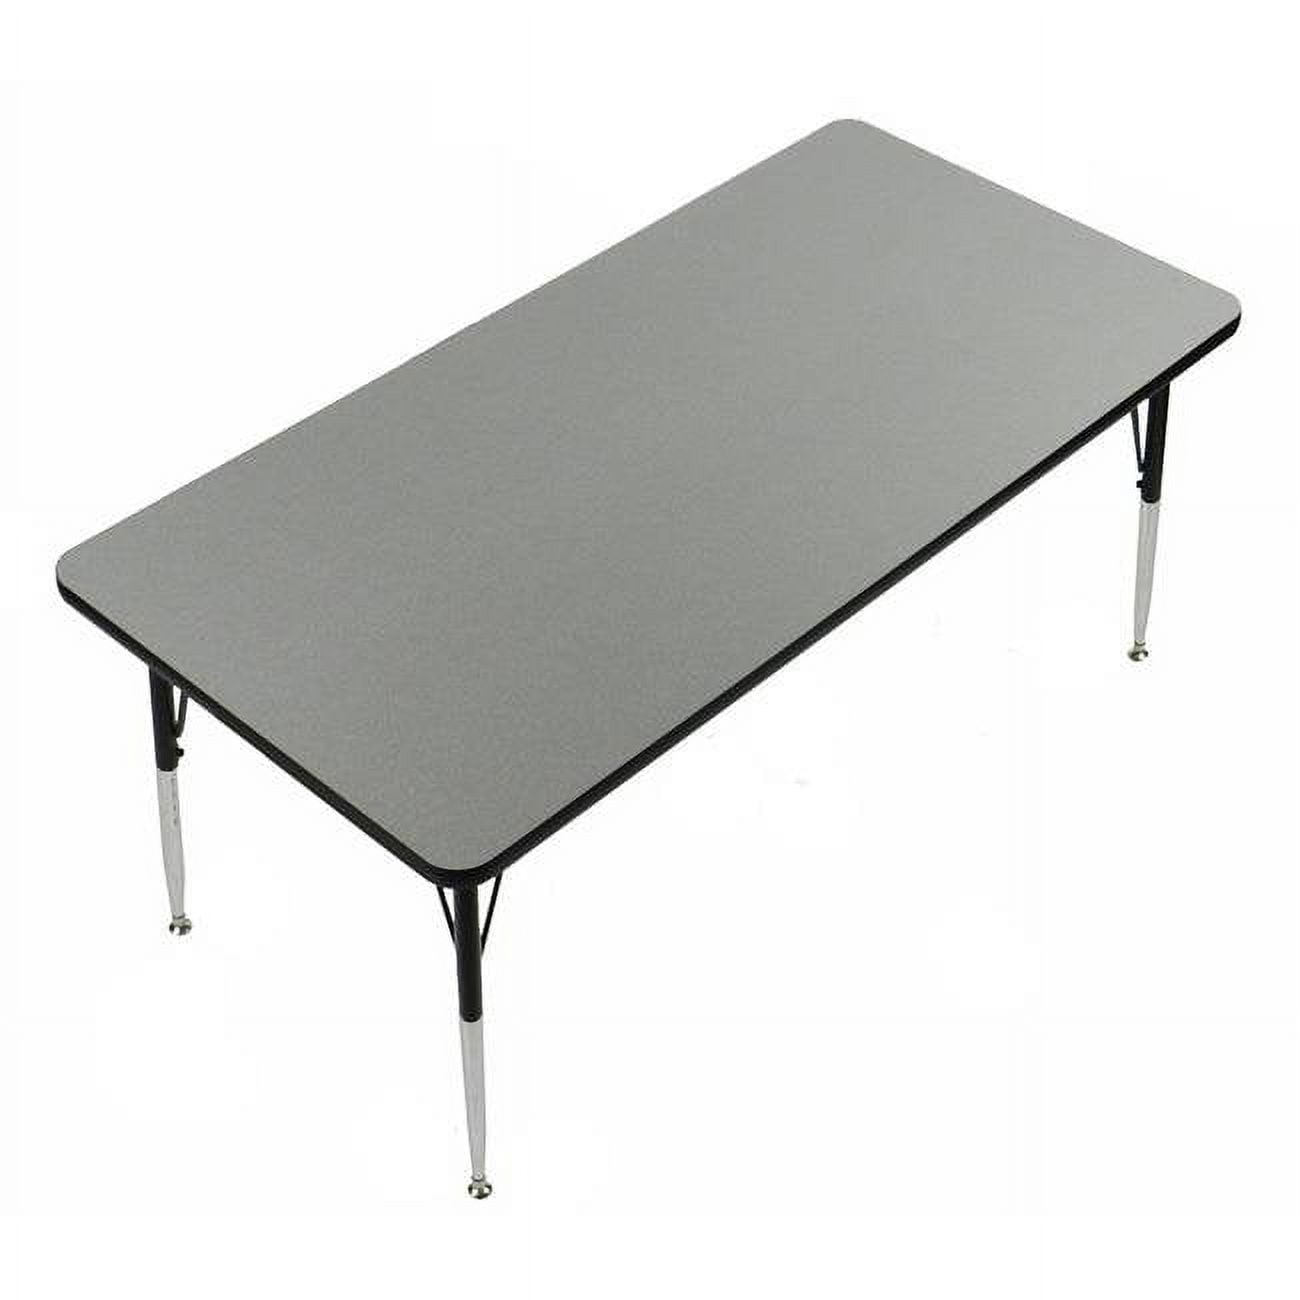 Picture of Correll A3048-REC-55 1.25 in. High Pressure Top Rectangular Activity Tables, Montana Granite - 30 x 48 in.